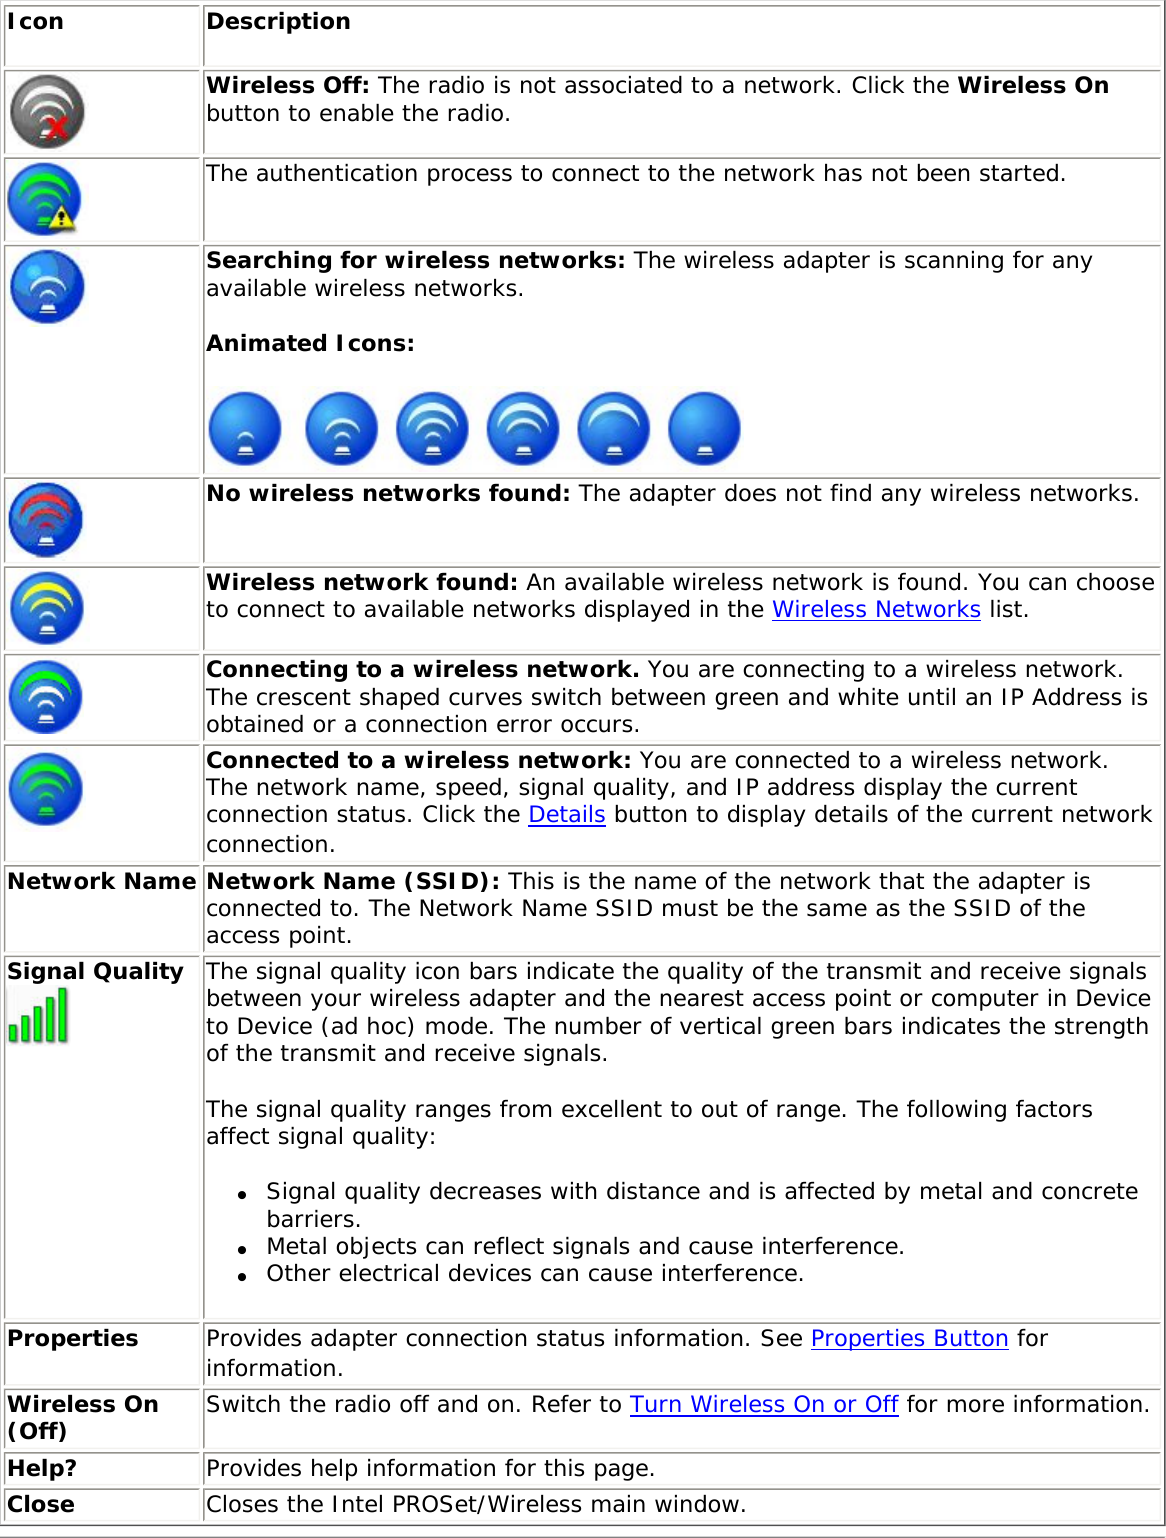 Icon DescriptionWireless Off: The radio is not associated to a network. Click the Wireless On button to enable the radio.The authentication process to connect to the network has not been started.Searching for wireless networks: The wireless adapter is scanning for any available wireless networks. Animated Icons: No wireless networks found: The adapter does not find any wireless networks. Wireless network found: An available wireless network is found. You can choose to connect to available networks displayed in the Wireless Networks list.Connecting to a wireless network. You are connecting to a wireless network. The crescent shaped curves switch between green and white until an IP Address is obtained or a connection error occurs.Connected to a wireless network: You are connected to a wireless network. The network name, speed, signal quality, and IP address display the current connection status. Click the Details button to display details of the current network connection.Network Name Network Name (SSID): This is the name of the network that the adapter is connected to. The Network Name SSID must be the same as the SSID of the access point.Signal Quality The signal quality icon bars indicate the quality of the transmit and receive signals between your wireless adapter and the nearest access point or computer in Device to Device (ad hoc) mode. The number of vertical green bars indicates the strength of the transmit and receive signals. The signal quality ranges from excellent to out of range. The following factors affect signal quality: ●     Signal quality decreases with distance and is affected by metal and concrete barriers. ●     Metal objects can reflect signals and cause interference. ●     Other electrical devices can cause interference. Properties  Provides adapter connection status information. See Properties Button for information. Wireless On (Off) Switch the radio off and on. Refer to Turn Wireless On or Off for more information.Help? Provides help information for this page. Close Closes the Intel PROSet/Wireless main window.